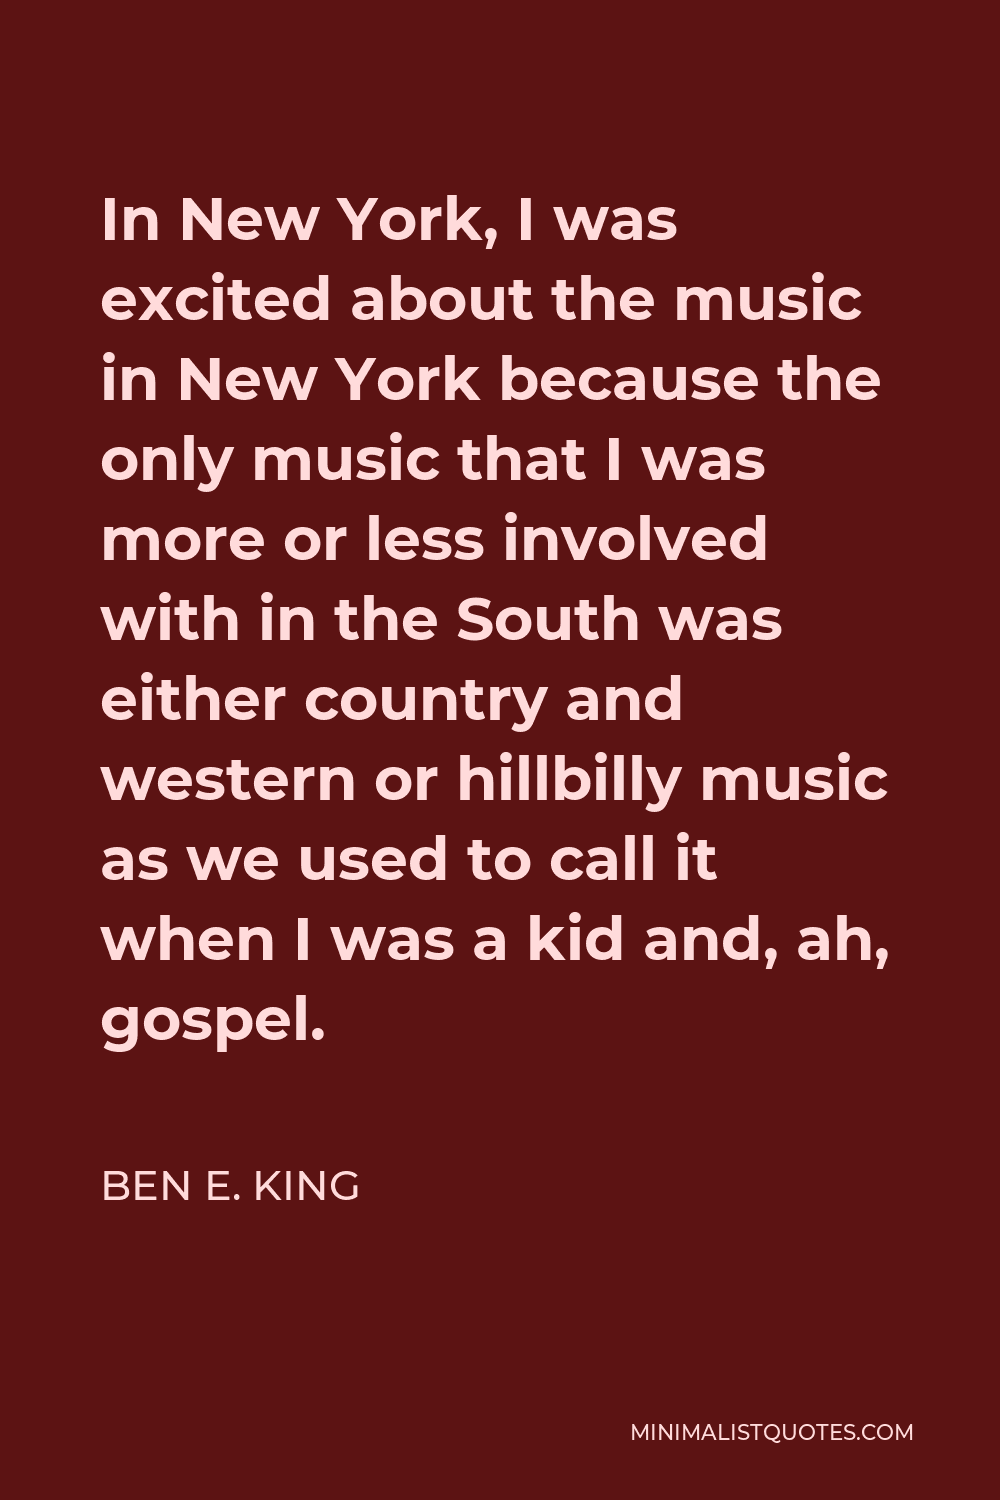 Ben E. King Quote - In New York, I was excited about the music in New York because the only music that I was more or less involved with in the South was either country and western or hillbilly music as we used to call it when I was a kid and, ah, gospel.